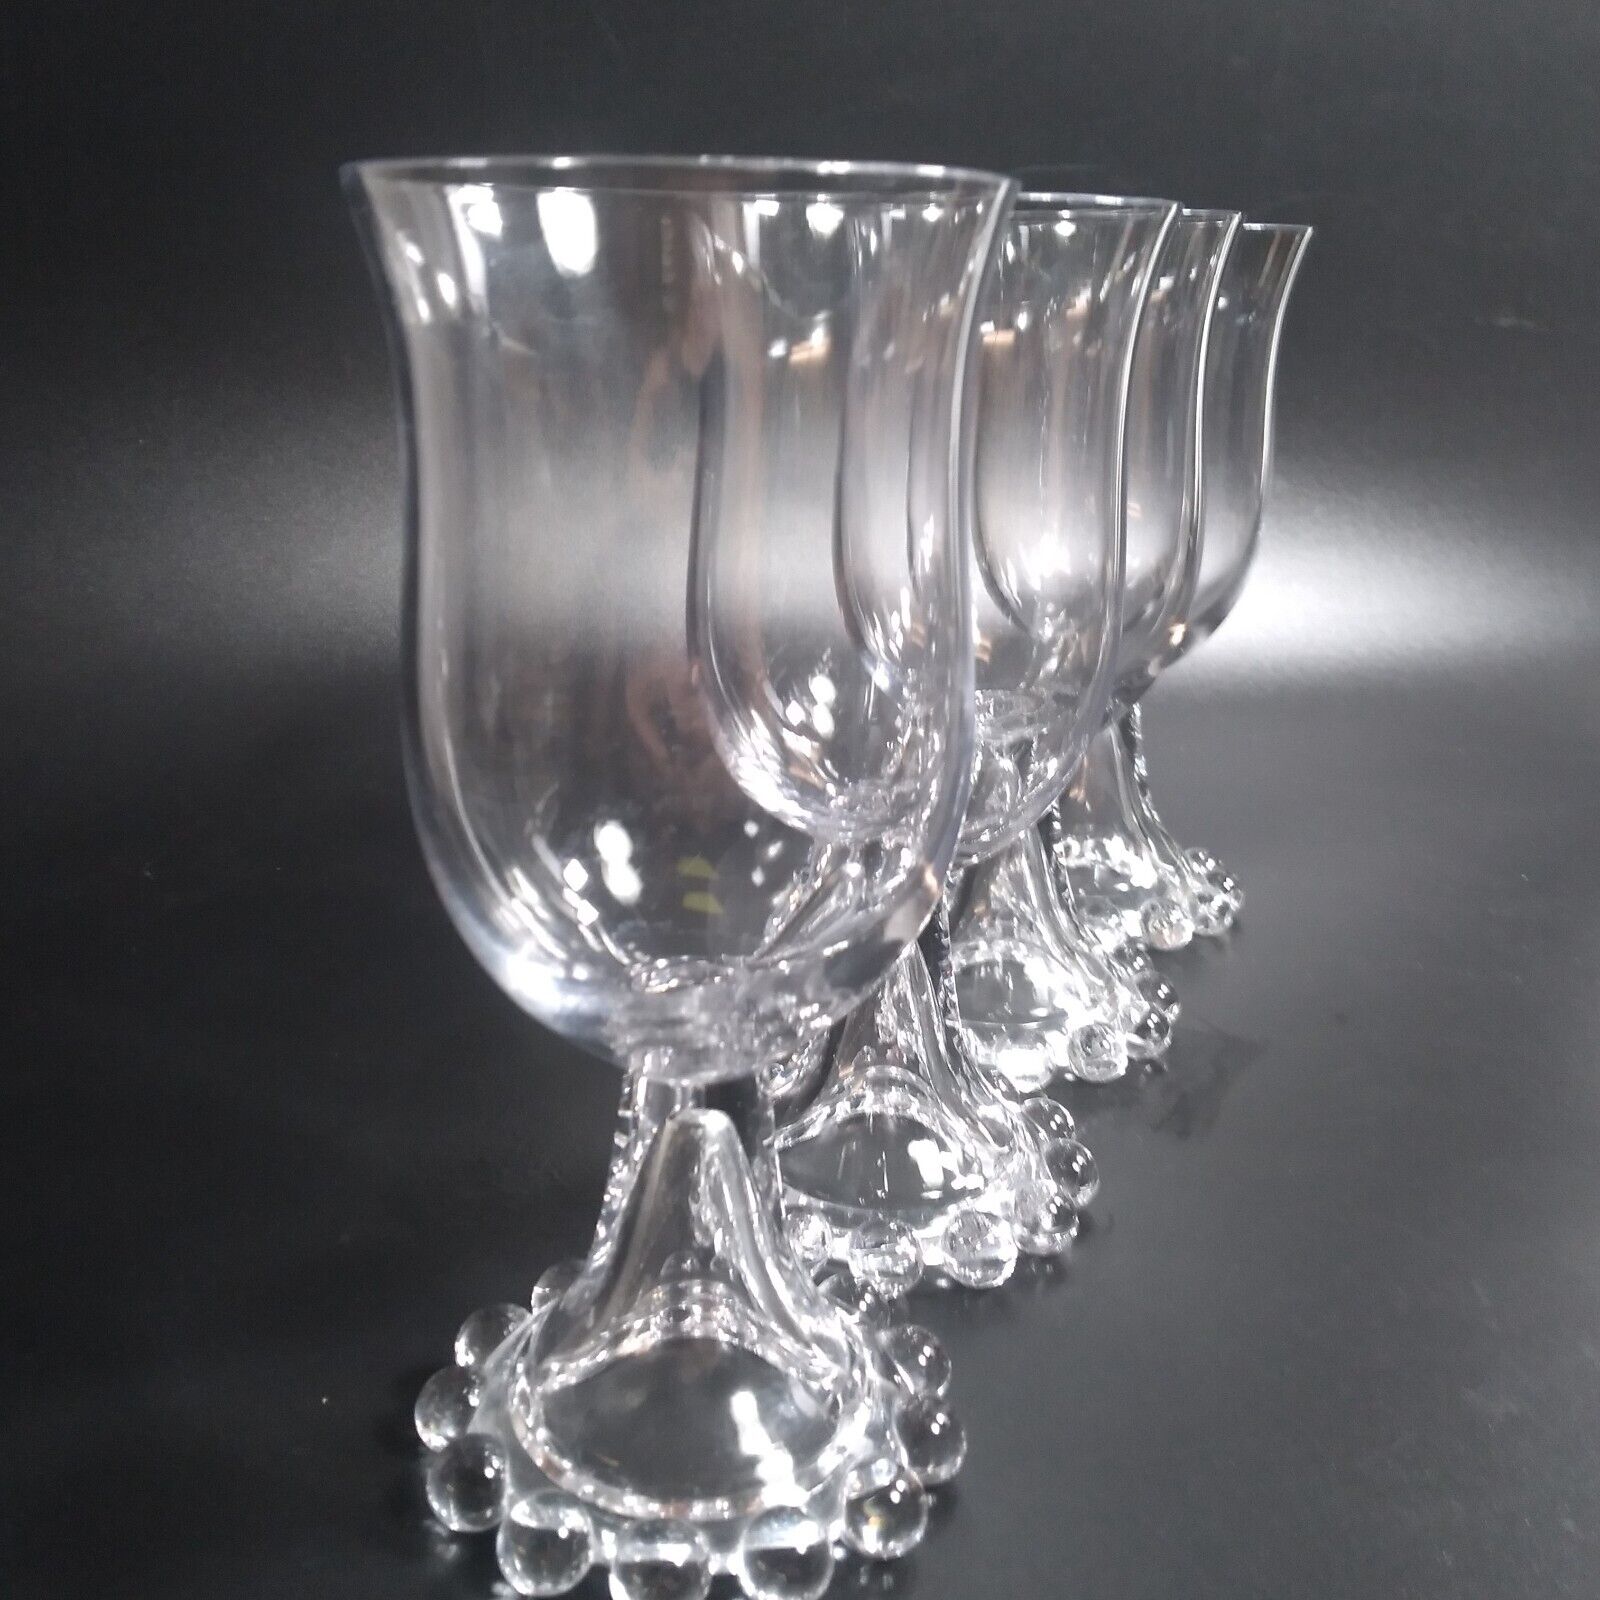 4 Imperial Candlewick Glass Water Goblets Glasses Bell Foot 400 / 190 6.75